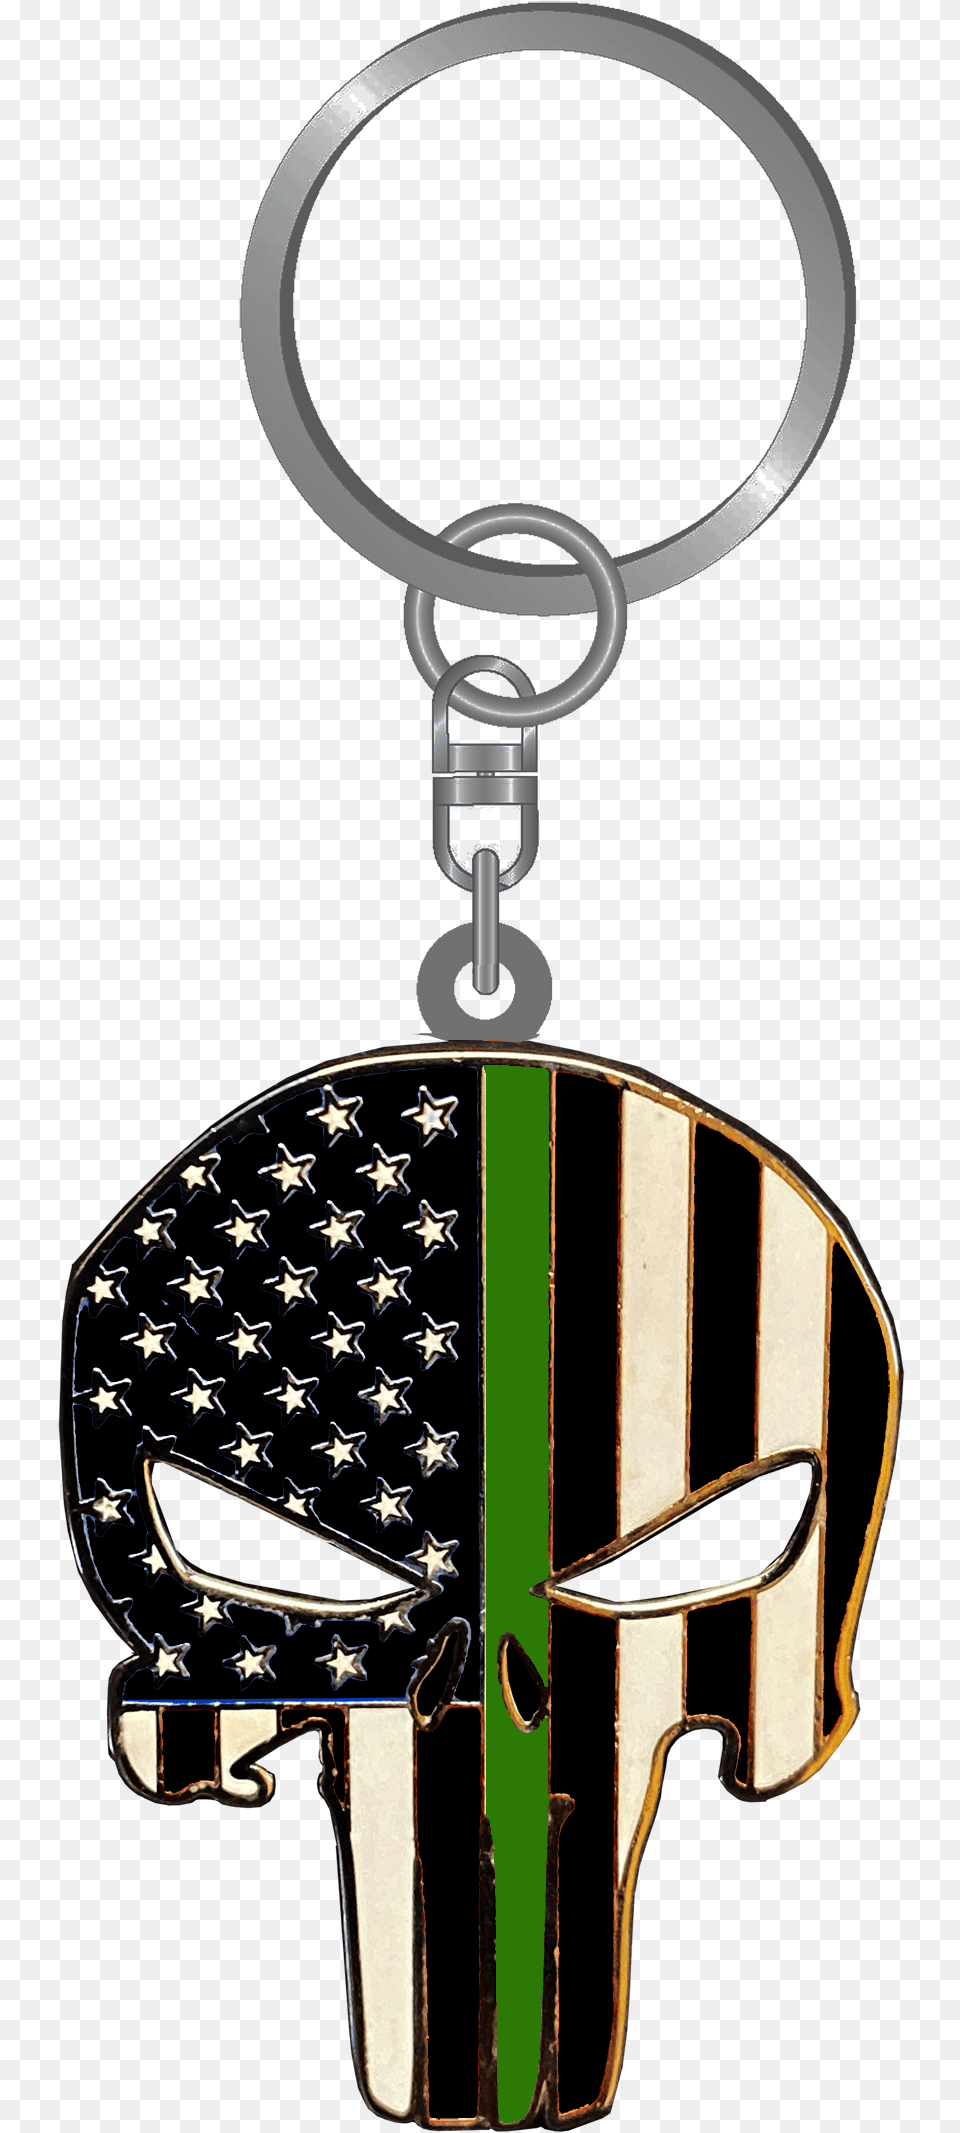 Police American Flag Usa Keychain Punisher Thin Blue Line Iphone, Accessories, Earring, Jewelry, Cross Png